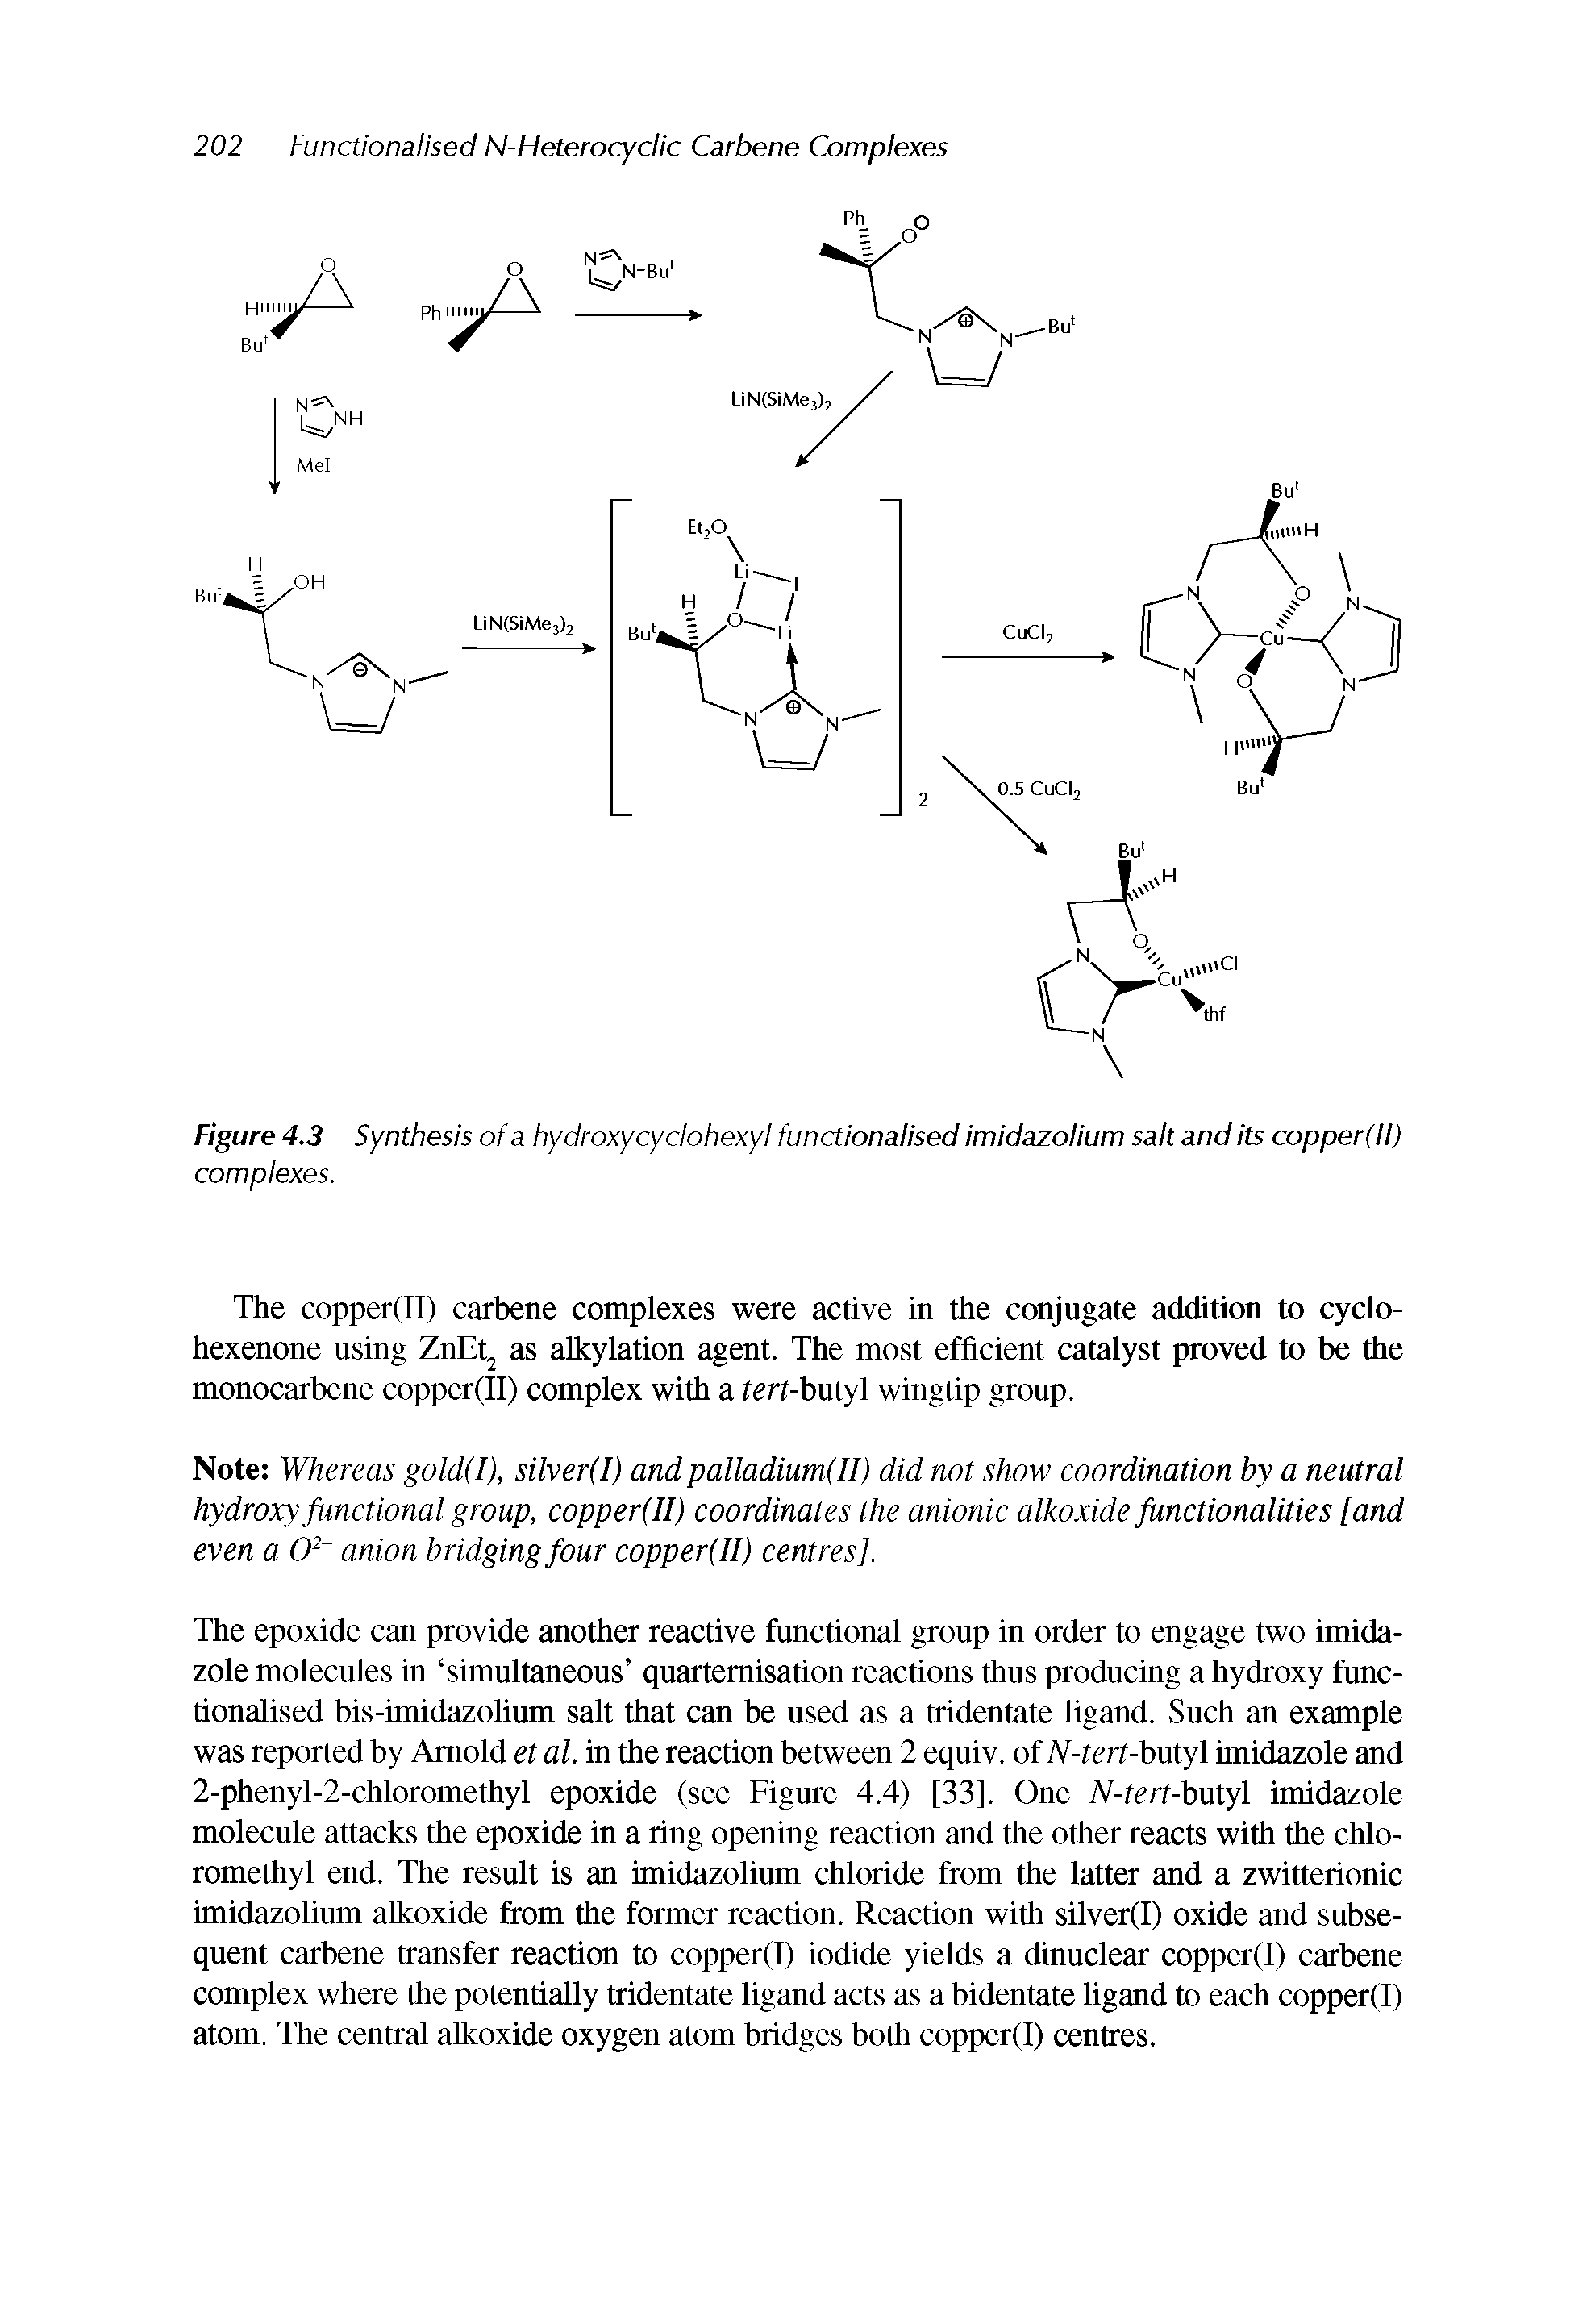 Figure 4.3 Synthesis of a hydroxy cyclohexyl functionalised imidazolium salt and its copperf II) complexes.